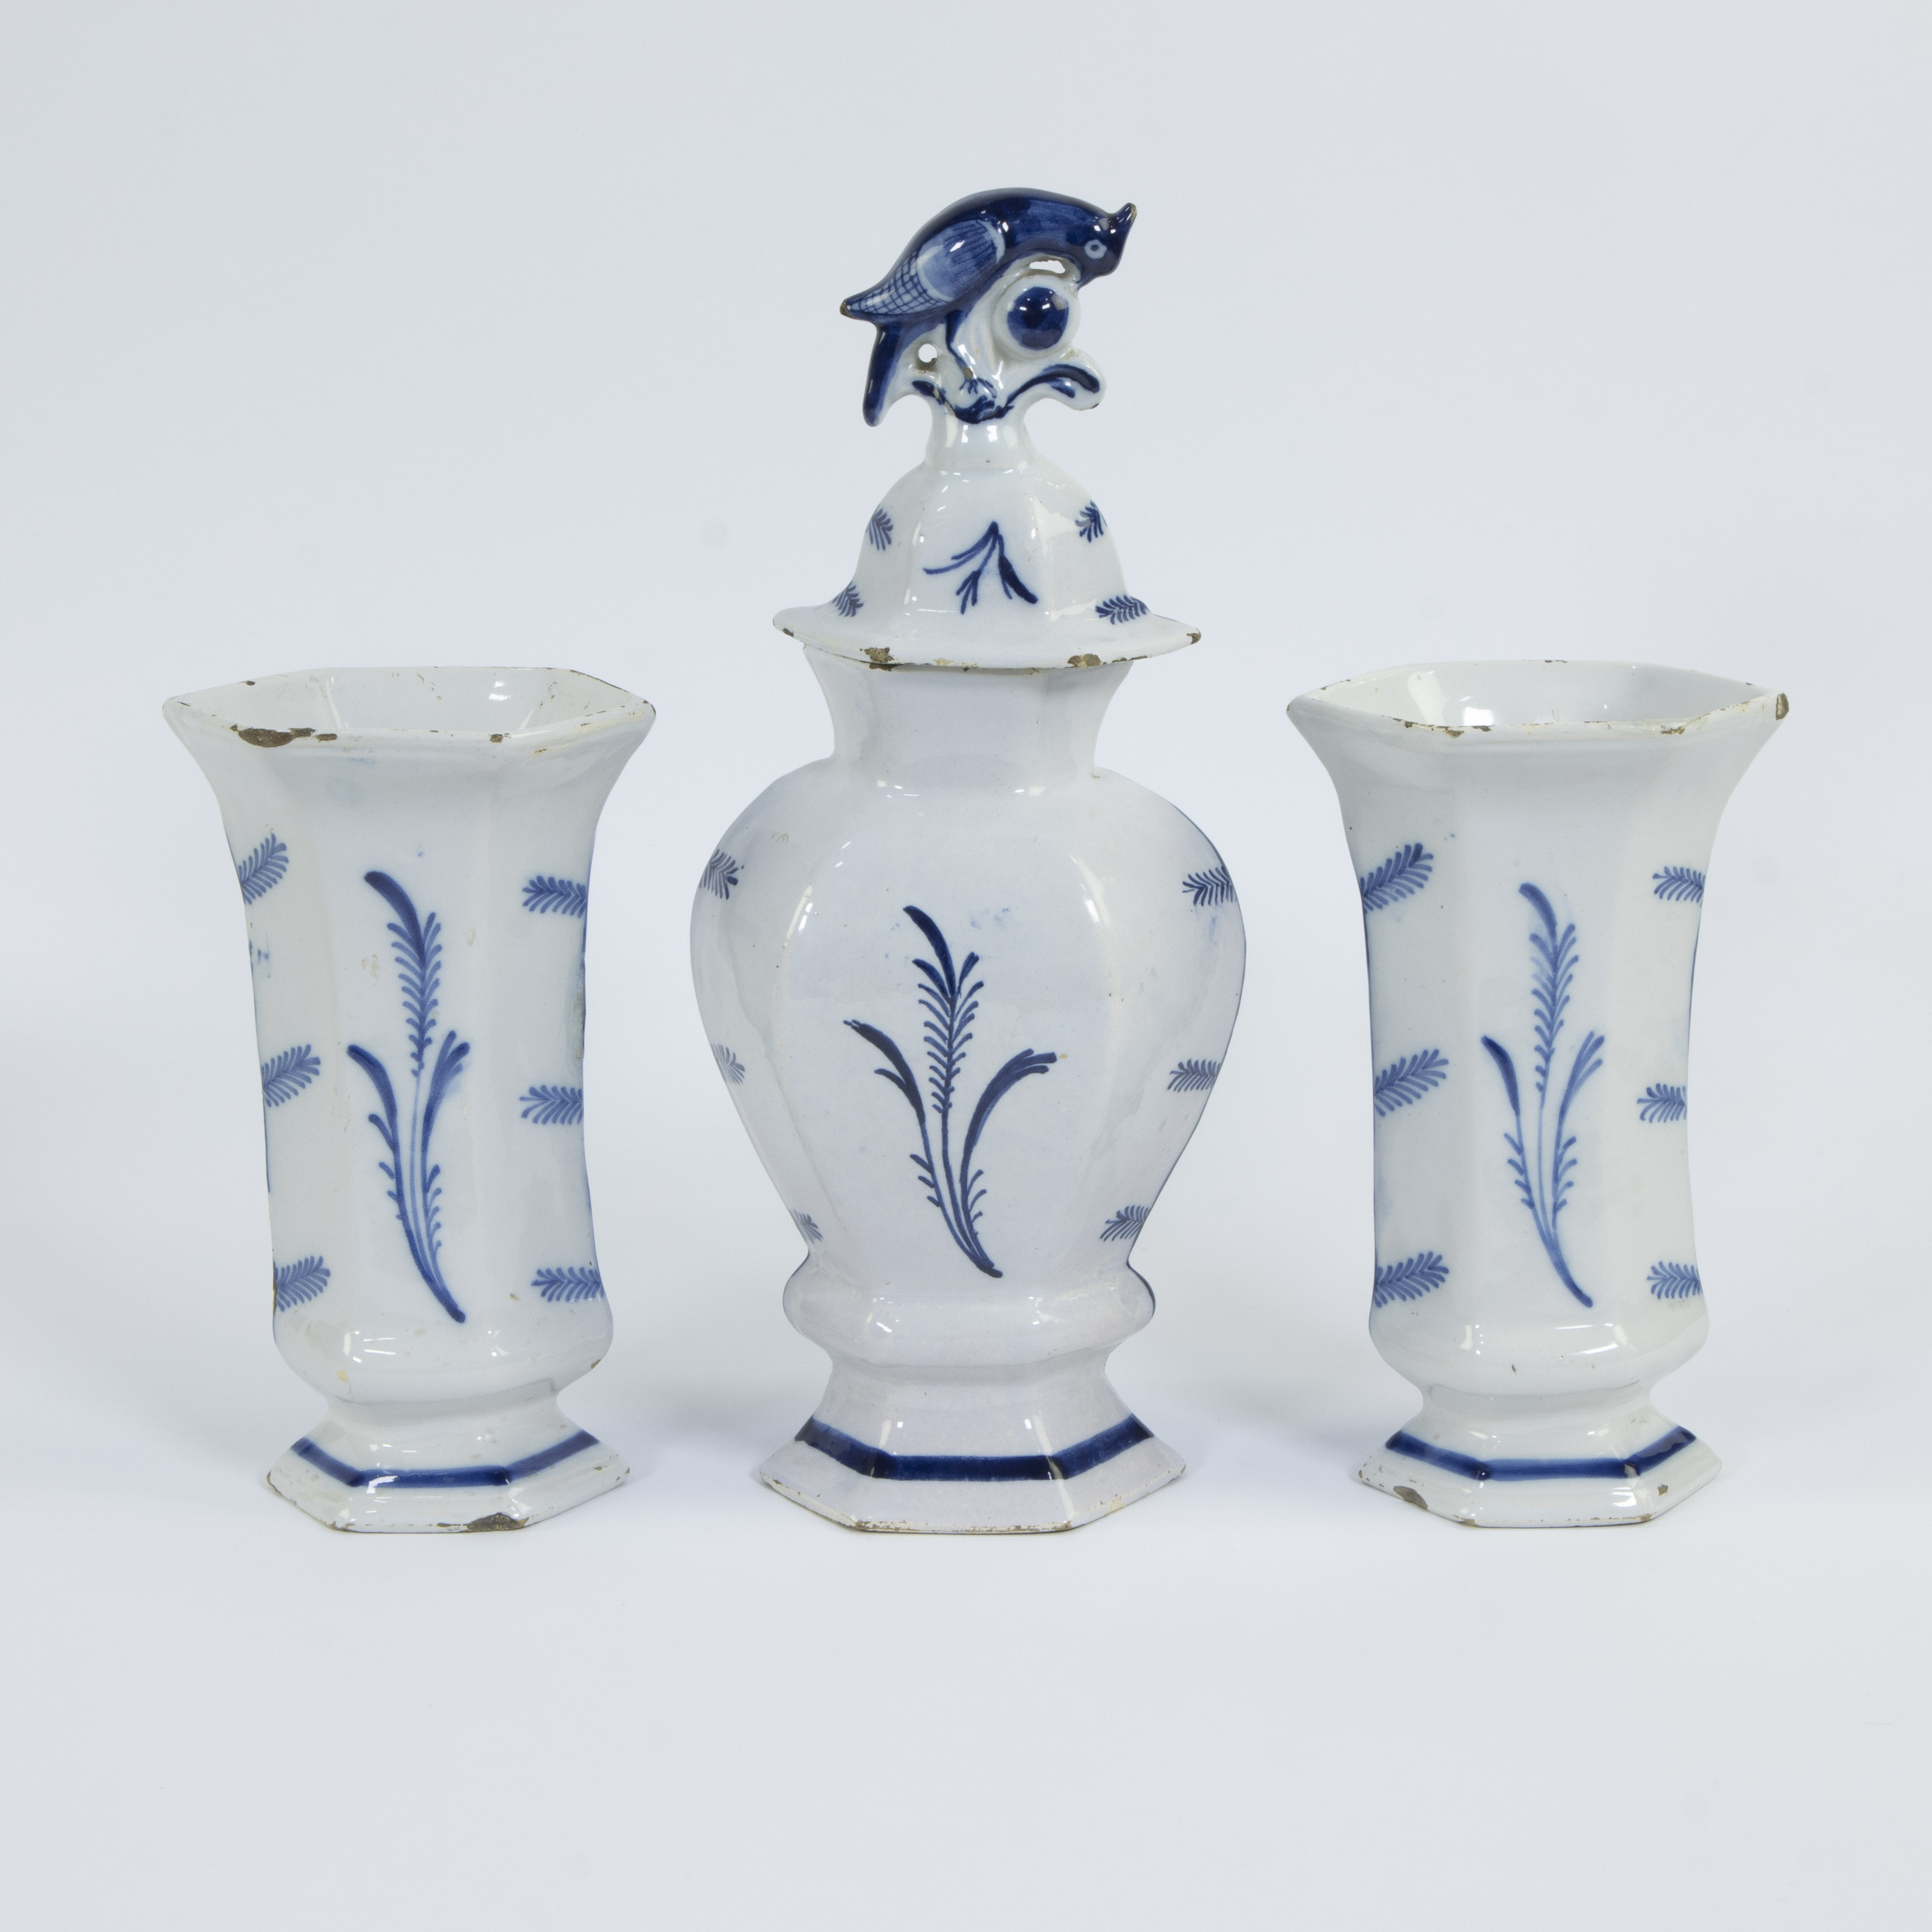 Collection Delftware, 3 polychrome plates 18th century and 3 vases blue white from a garniture set - Image 5 of 5